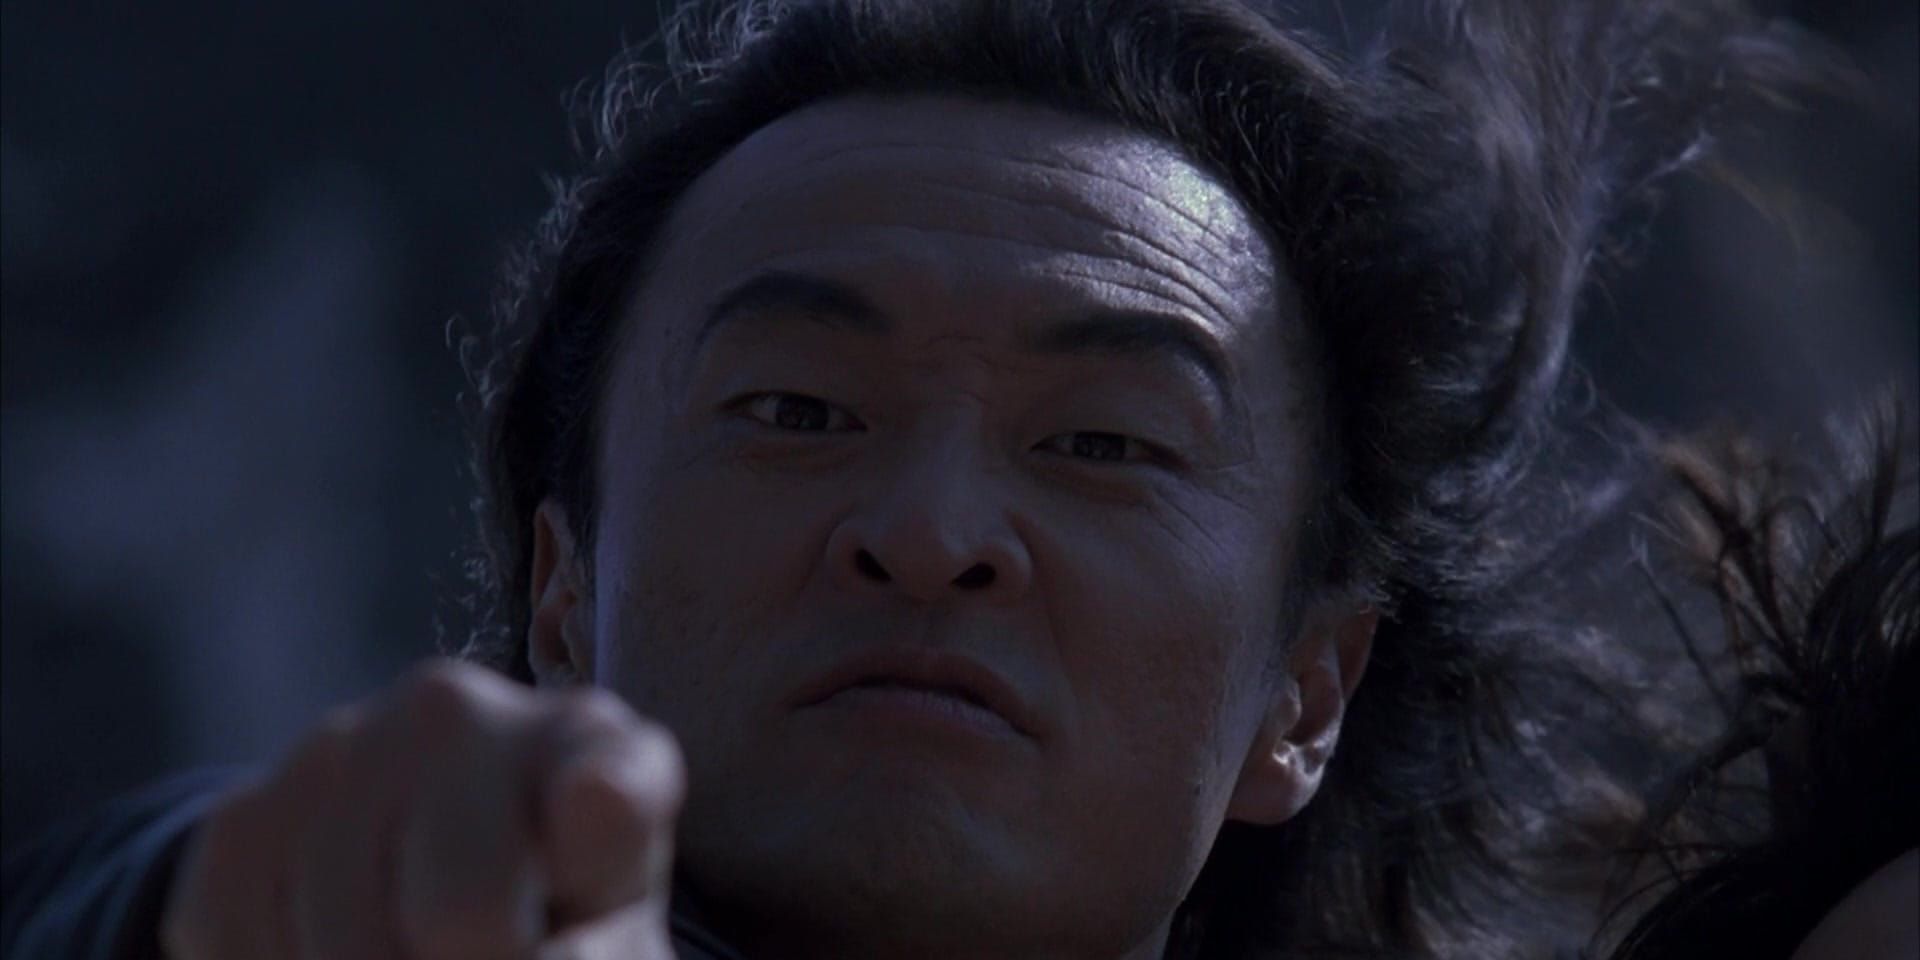 Shang Tsung going "YOUR SOUL IS MINE" in Mortal Kombat (1995)